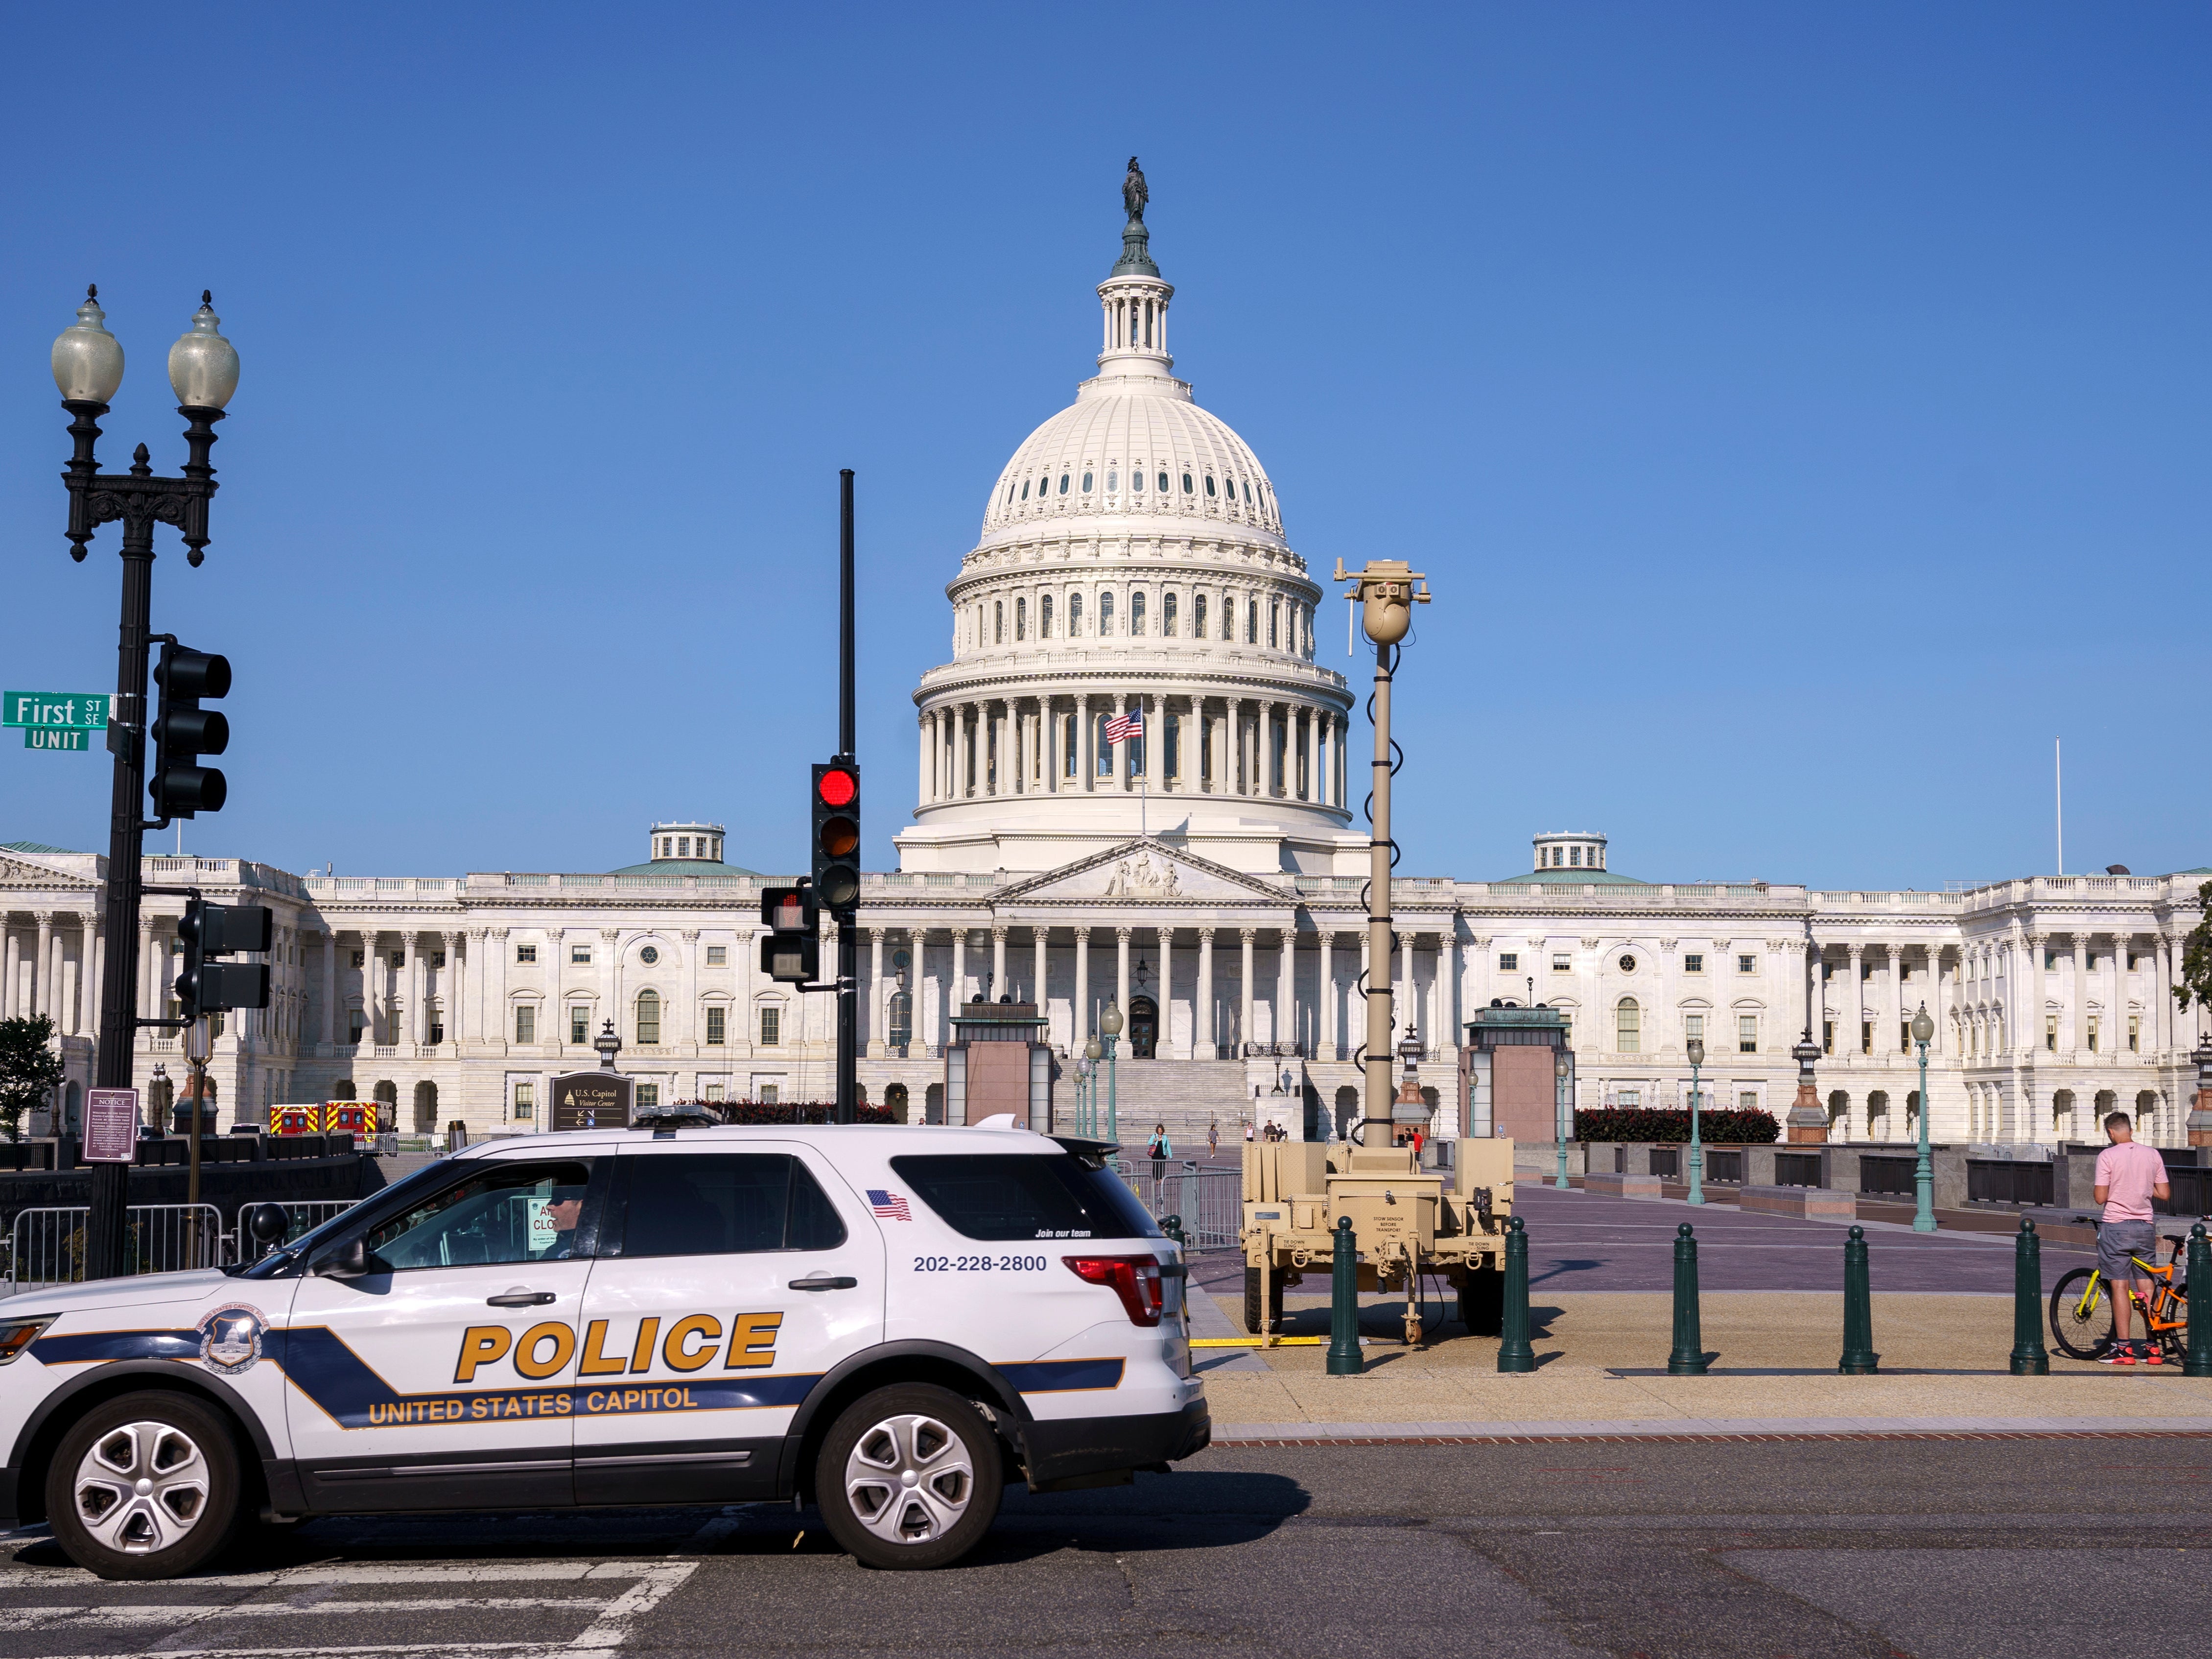 The Capitol Police have requested the support of the National Guard on Saturday if events get violent